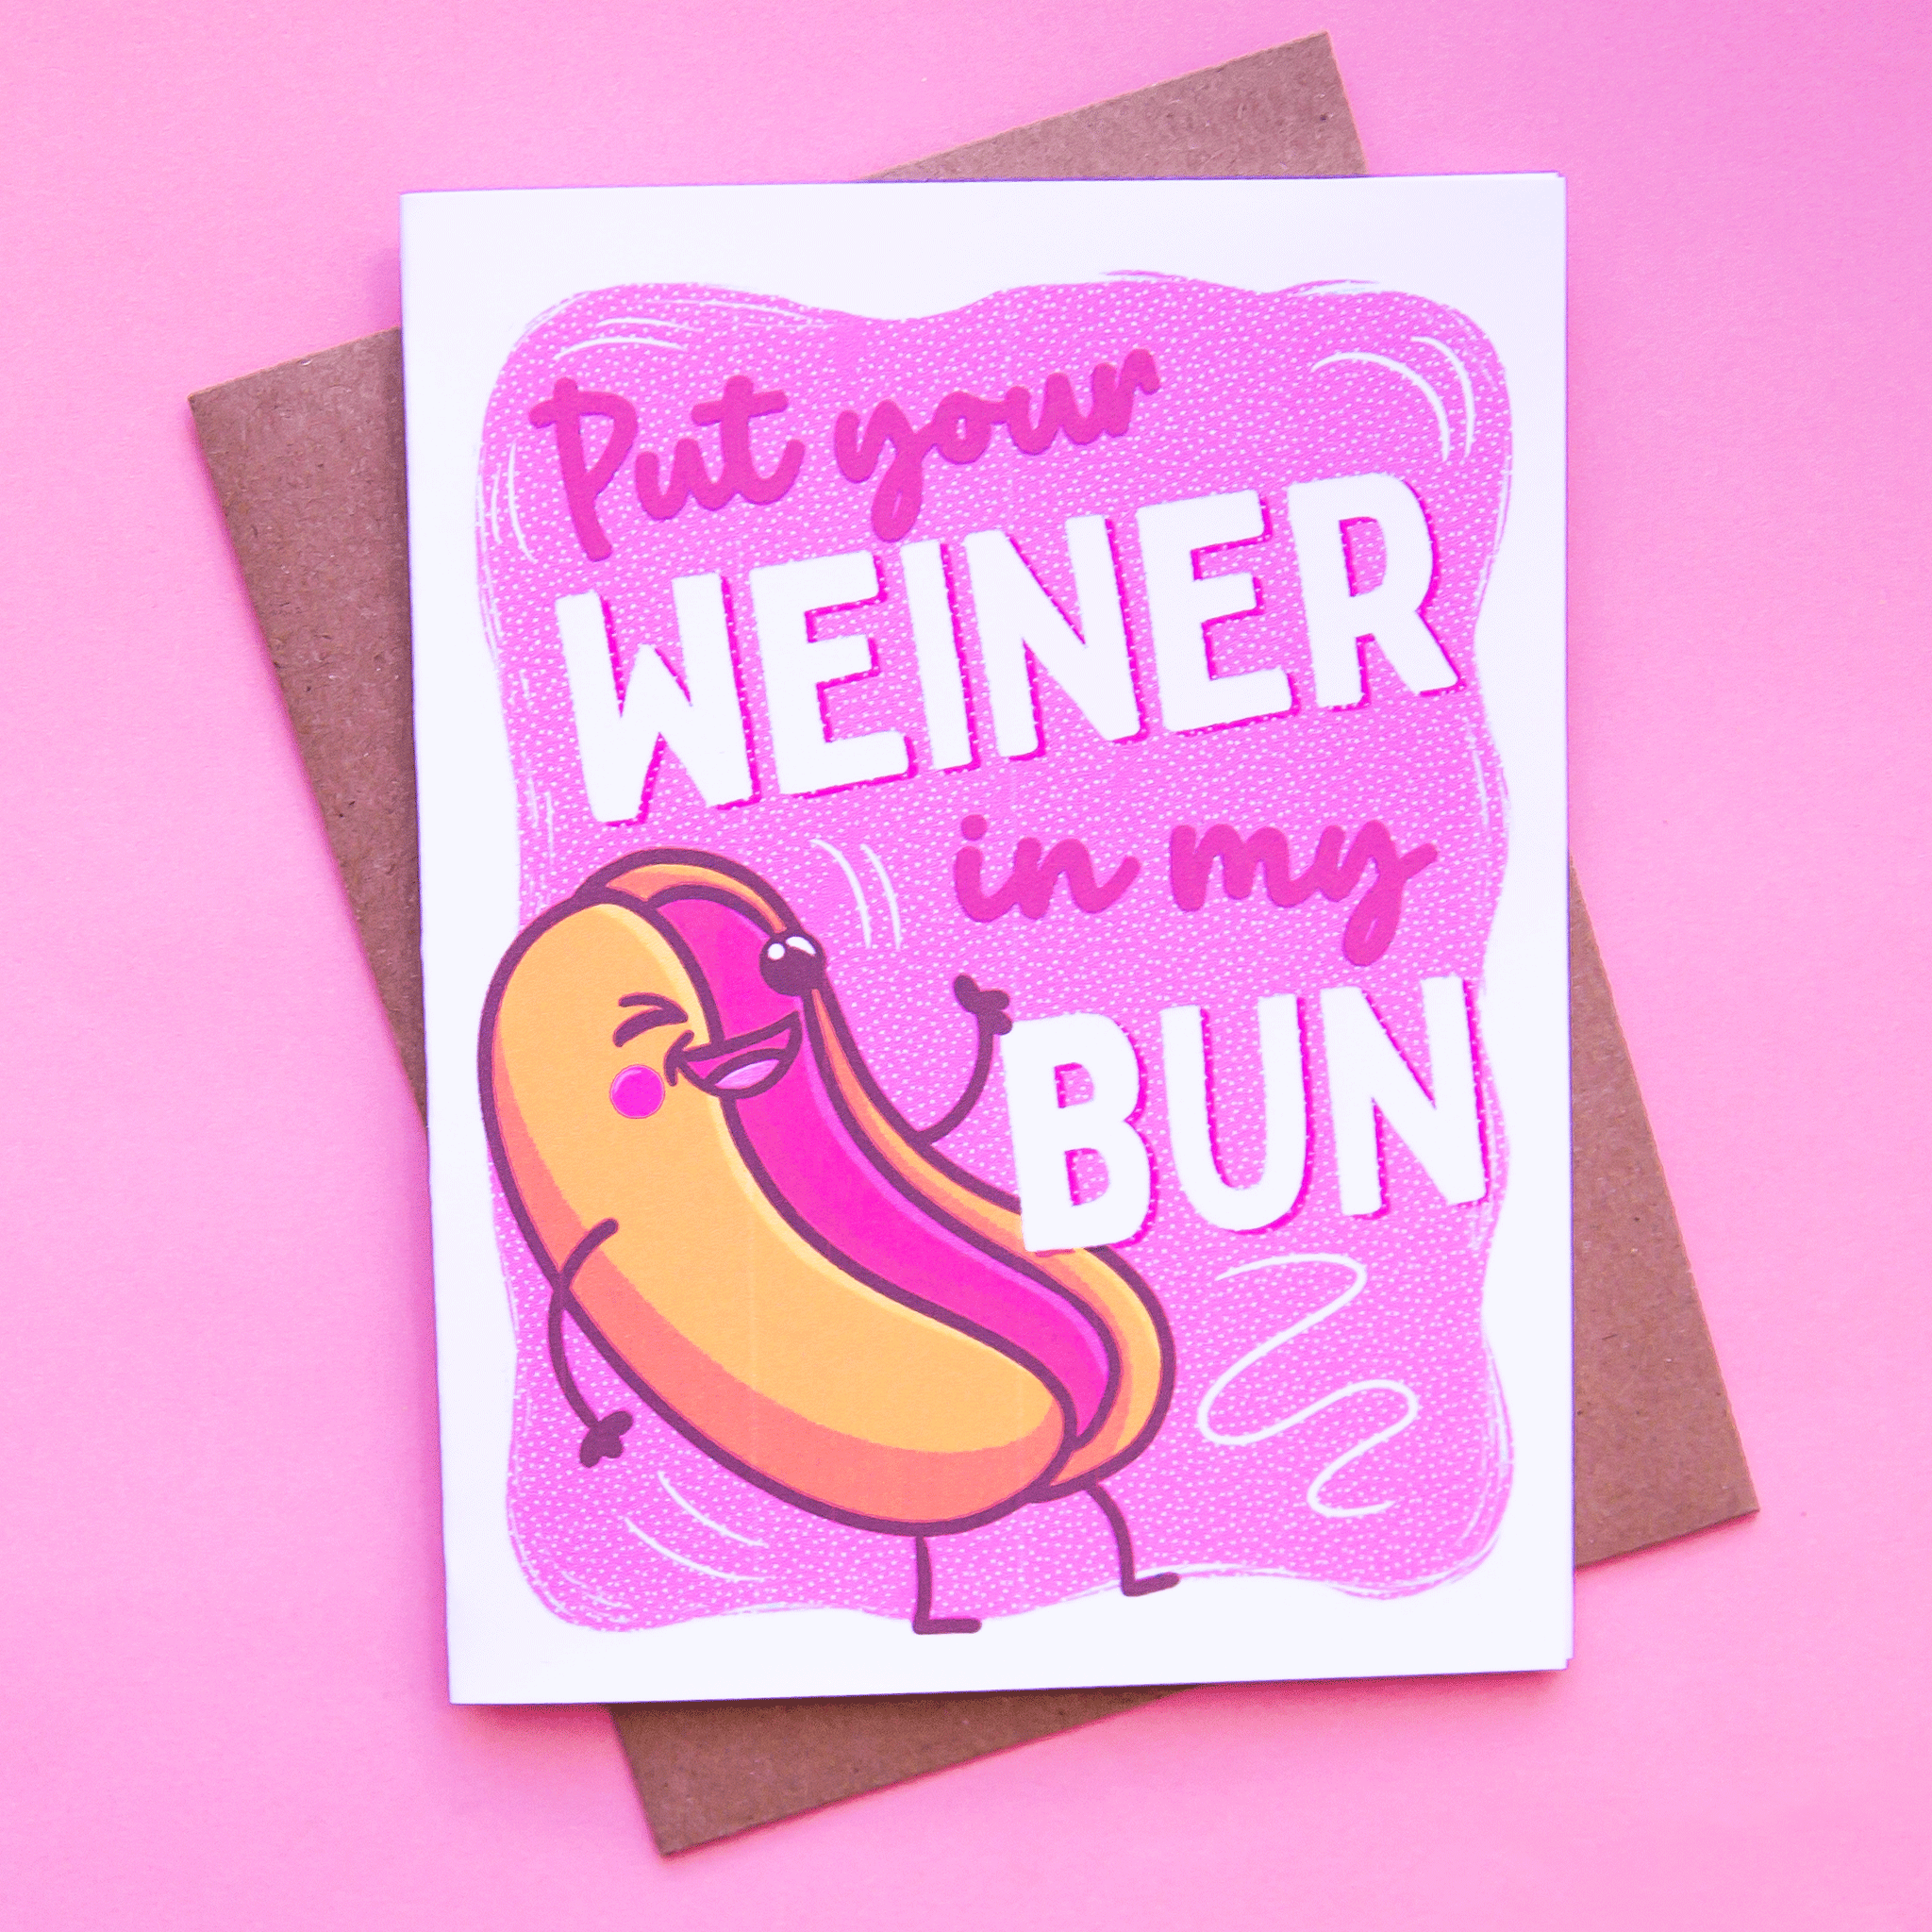 On a pink background is a pink card and a hot dog graphic with text that reads, "Put your Weiner in my Bun".